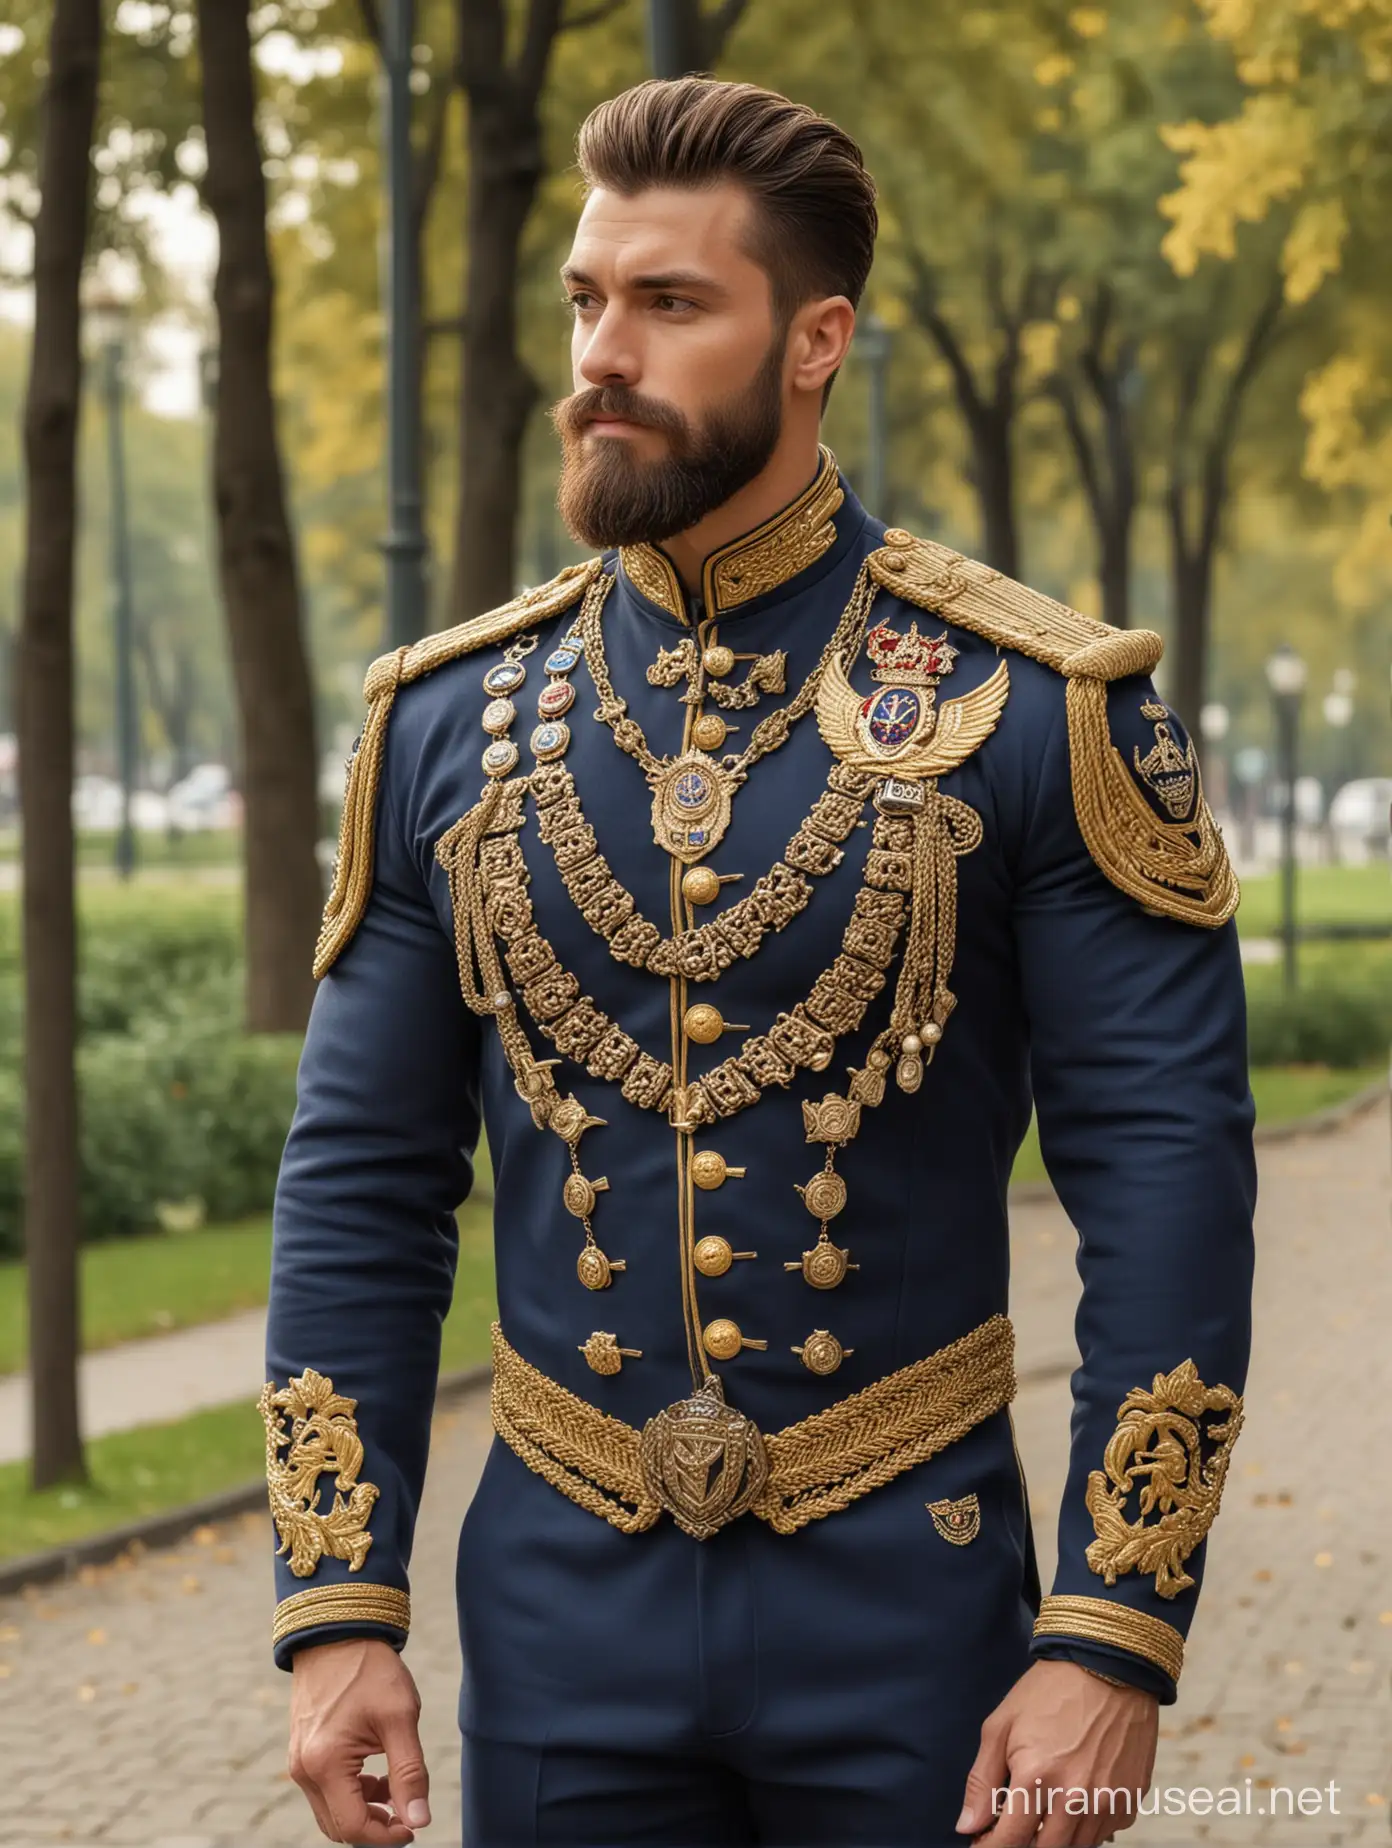 Tall and handsome bodybuilder king with beautiful hairstyle and beard with attractive eyes and broad shoulder and chest in navy and golden cavalry suit with necklace and badges walking on park